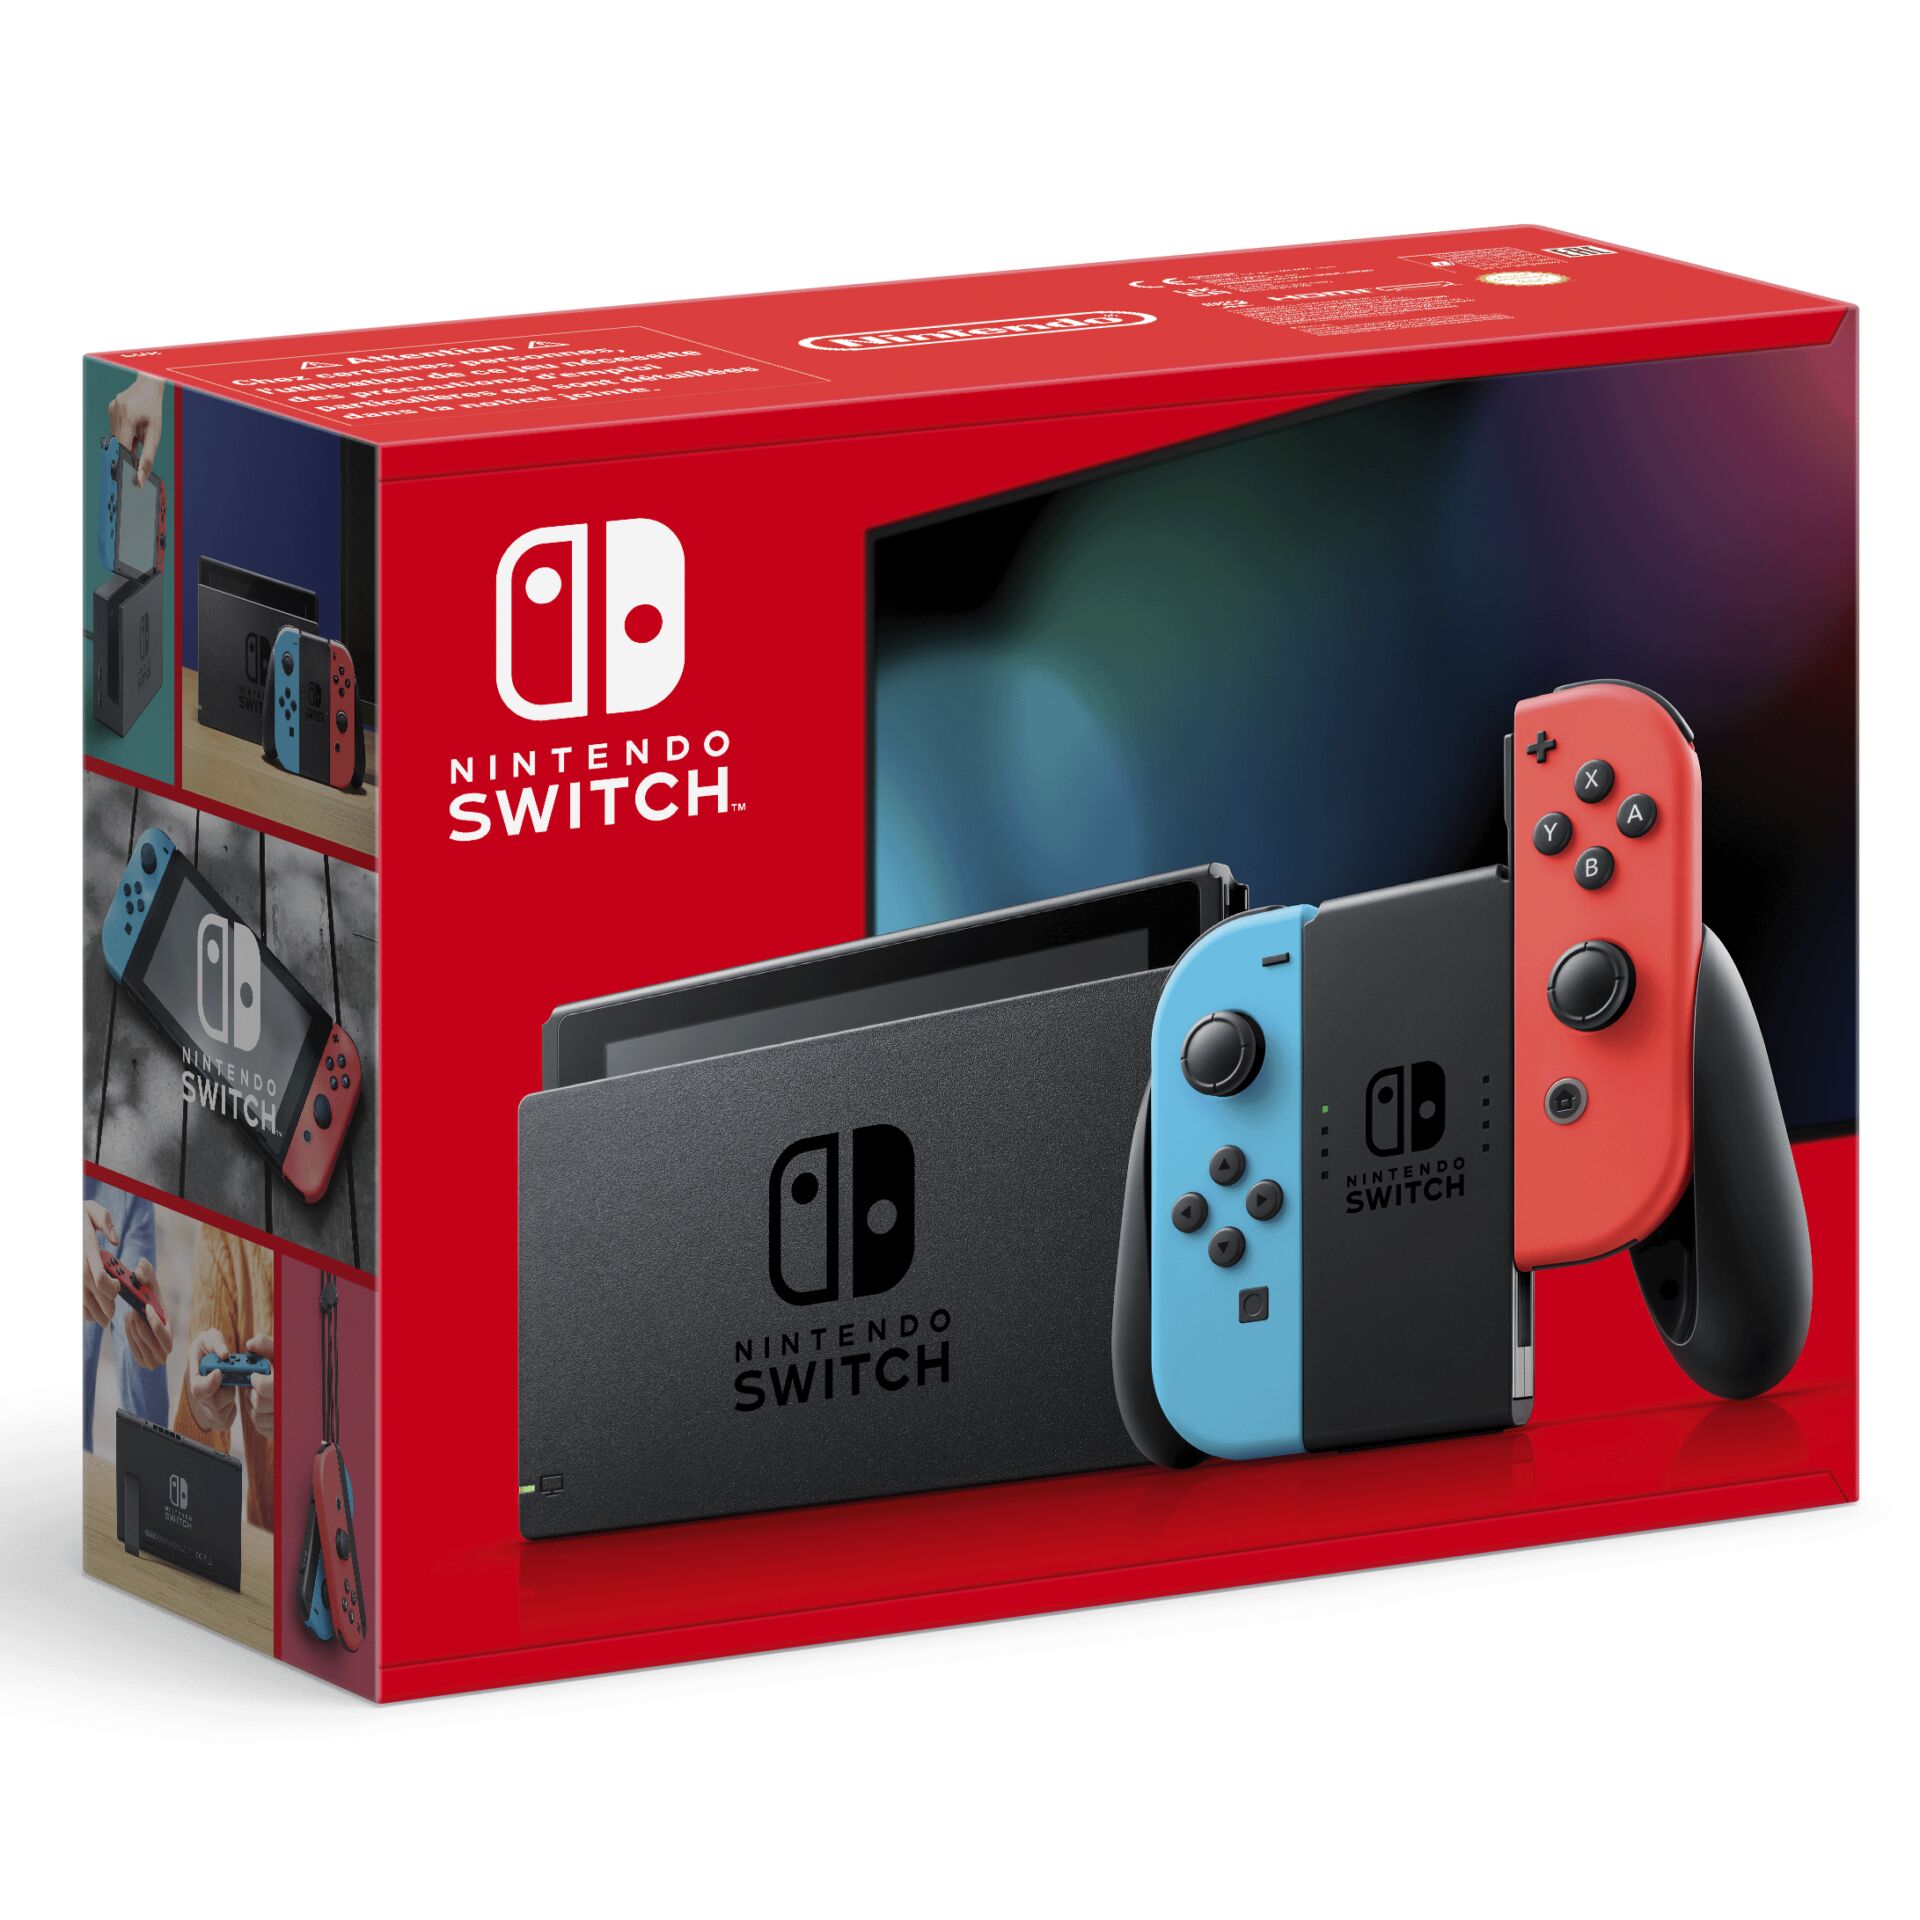 Nintendo Switch portable game console 15.8 cm (6.2) 32 GB Touchscreen Wi-Fi Blue, Grey, Red